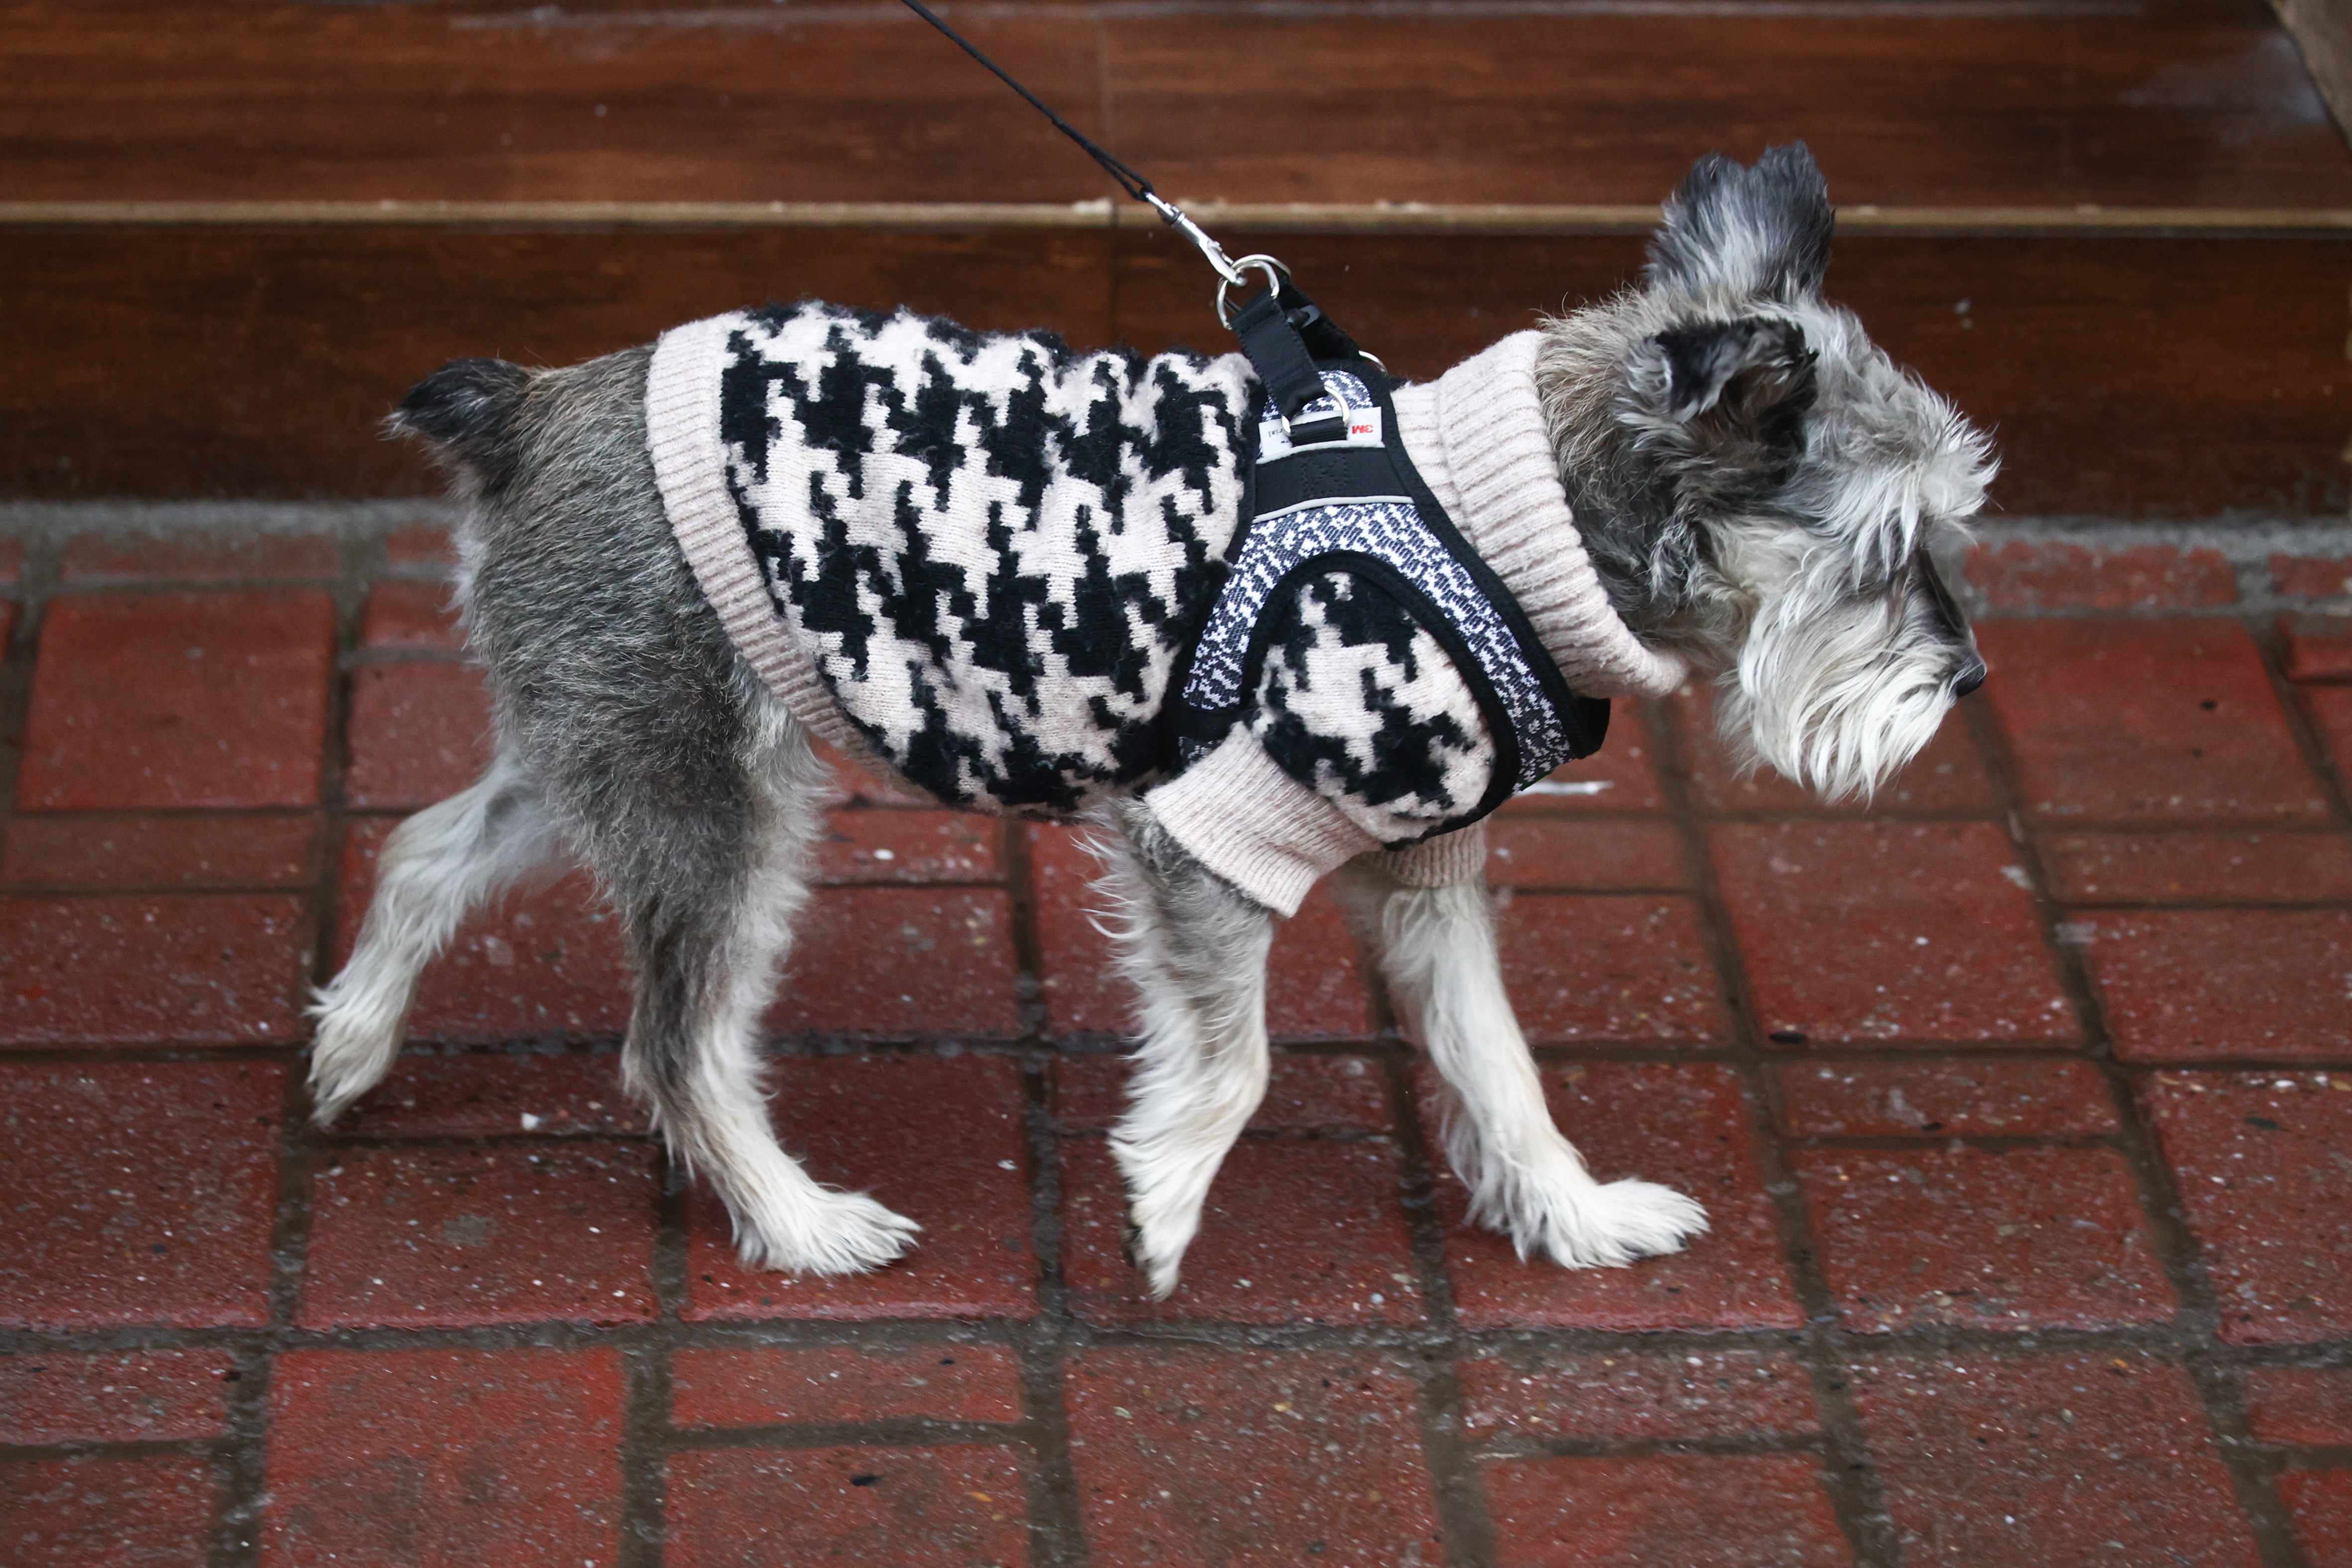 Dogs wearing clothes during winter in Poland